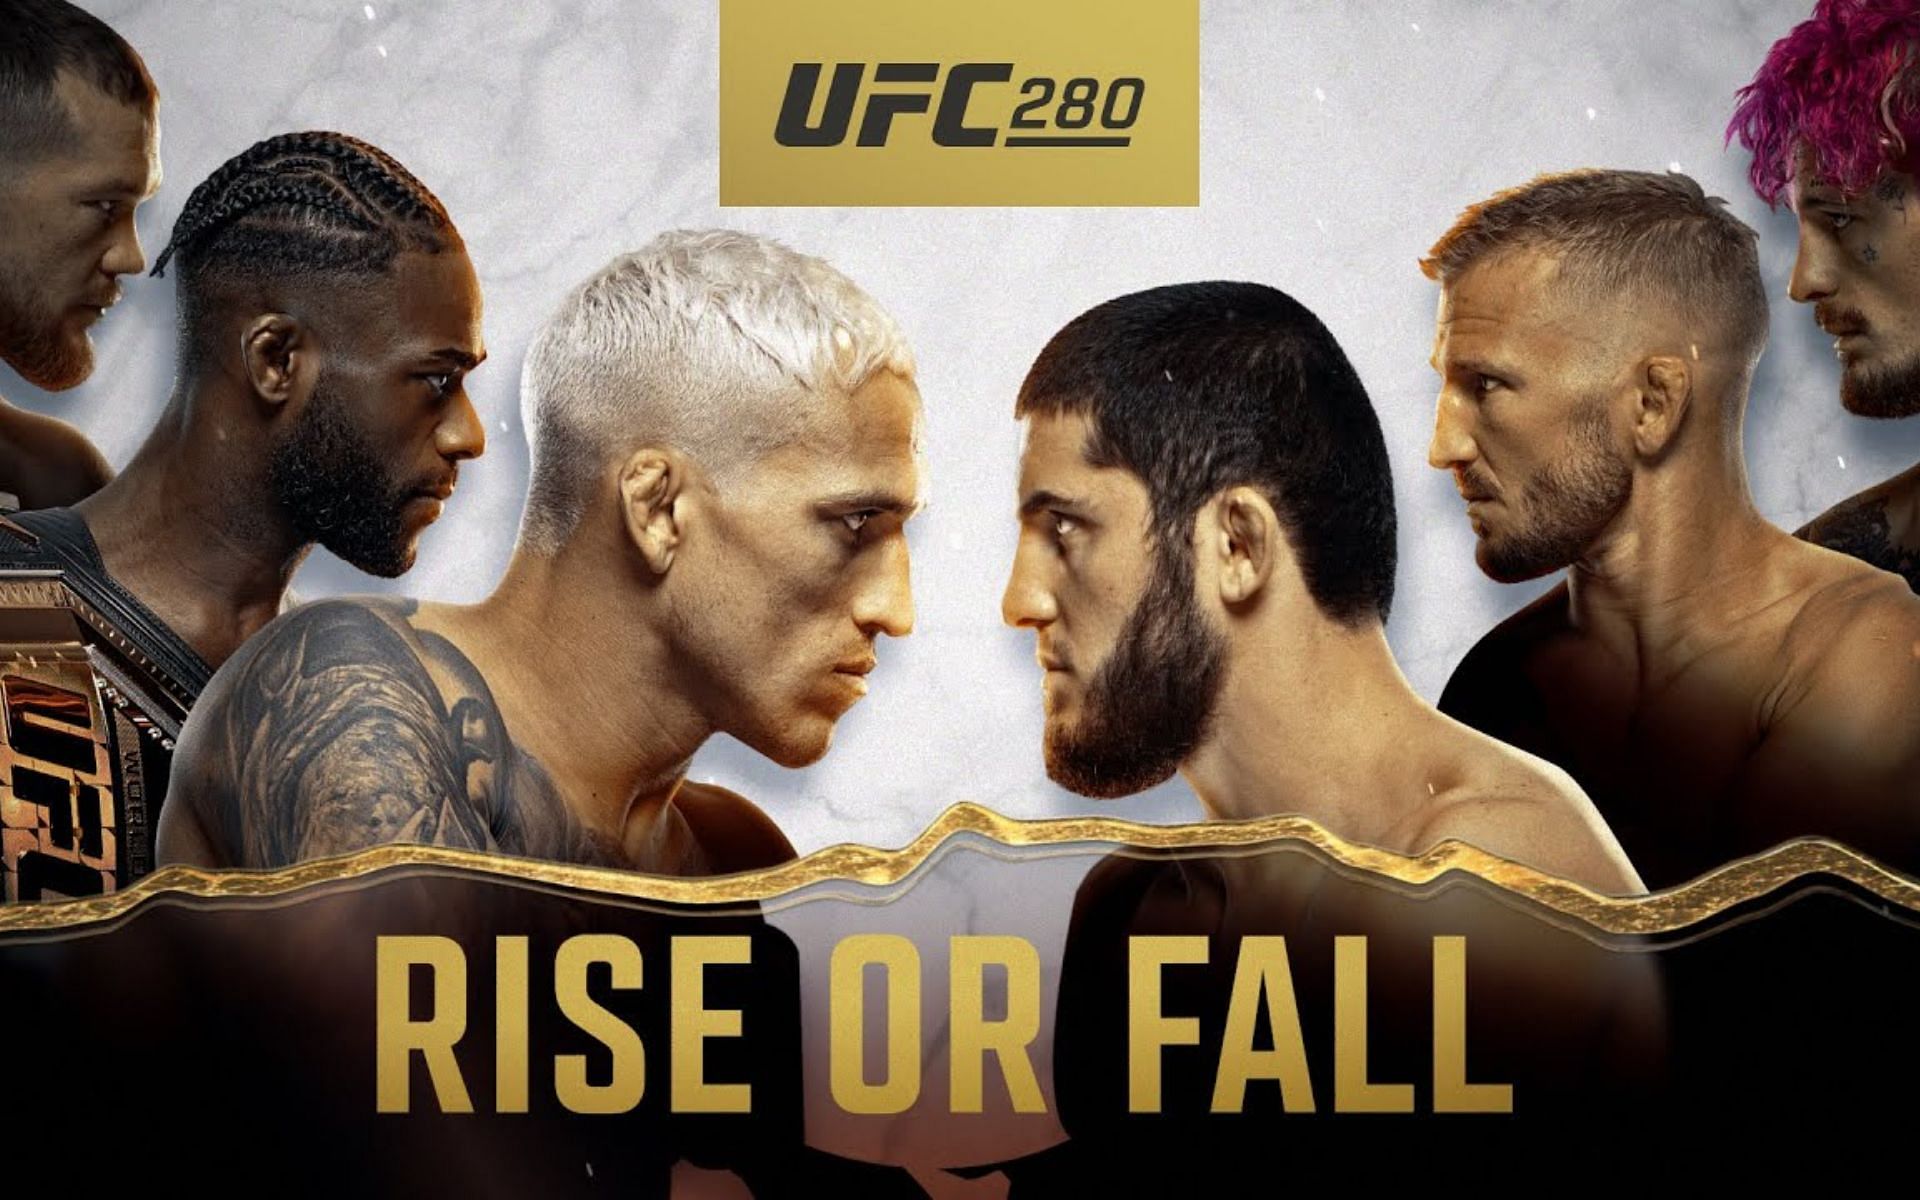 UFC 280 looks like it could be one of the best events of 2022